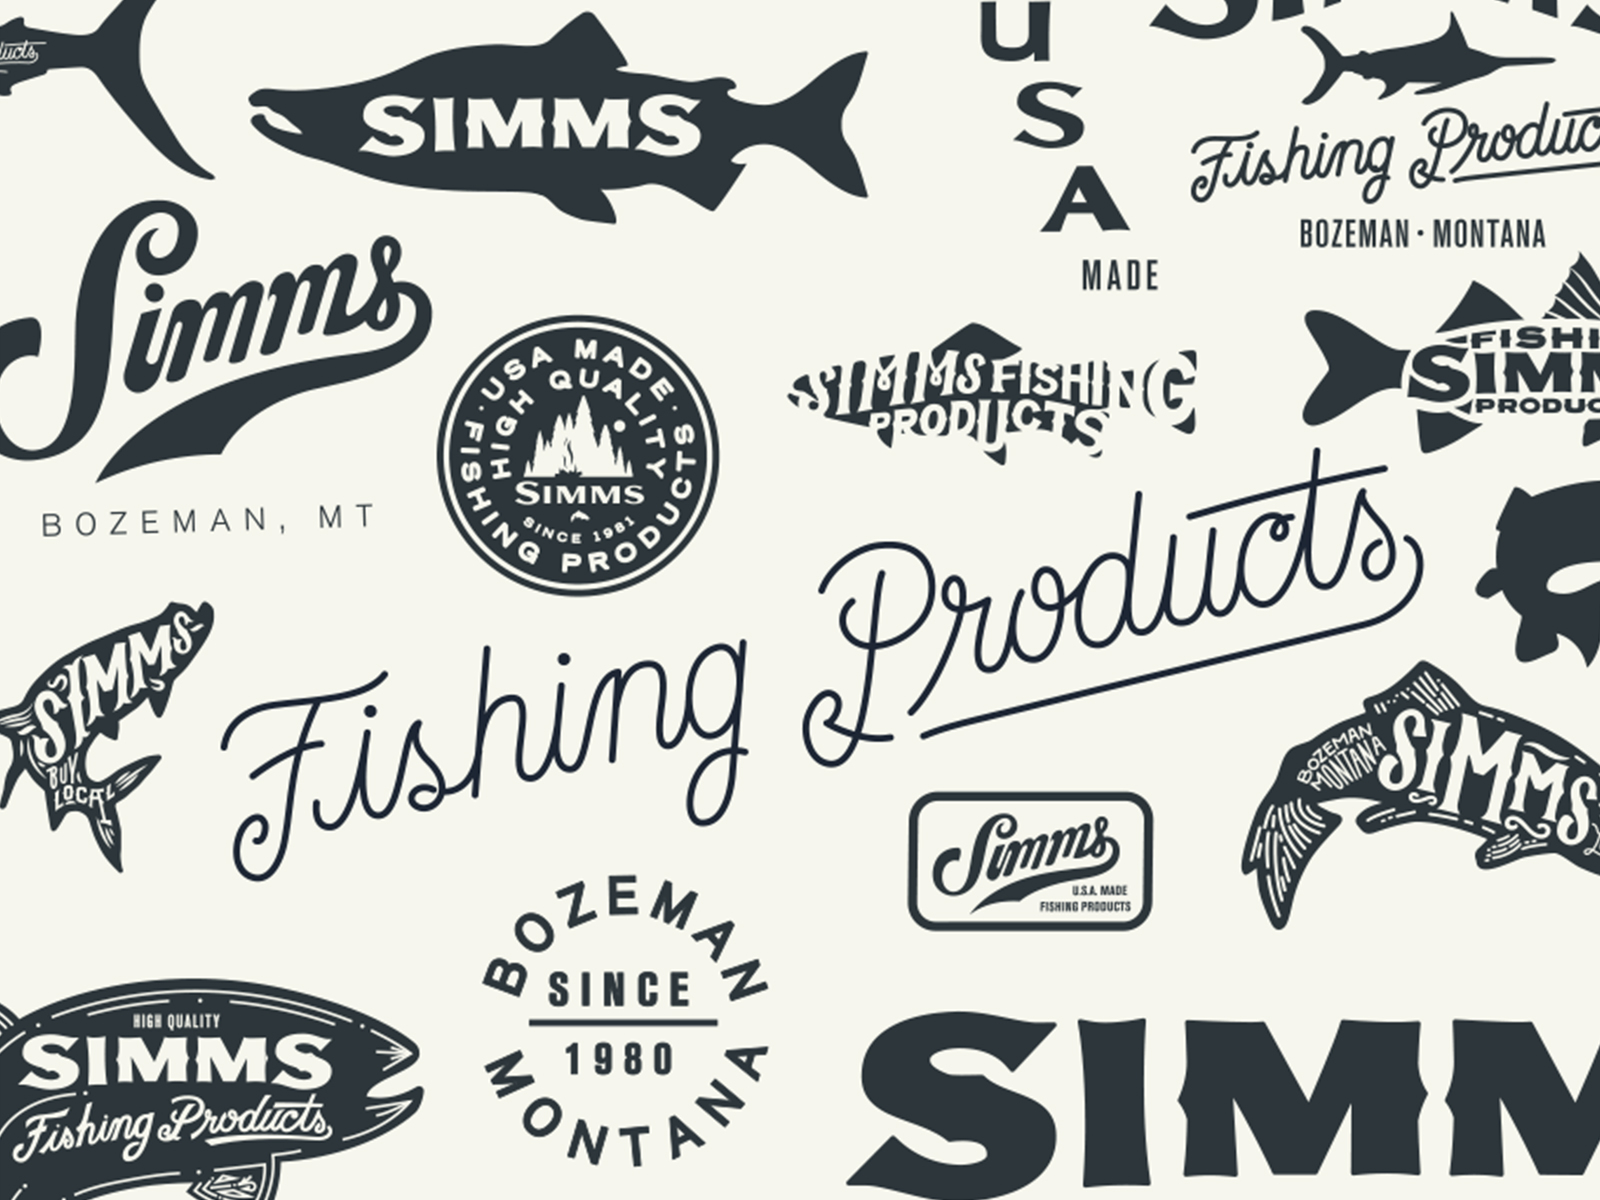 Kevin Kroneberger / Projects / Simms Fishing Products